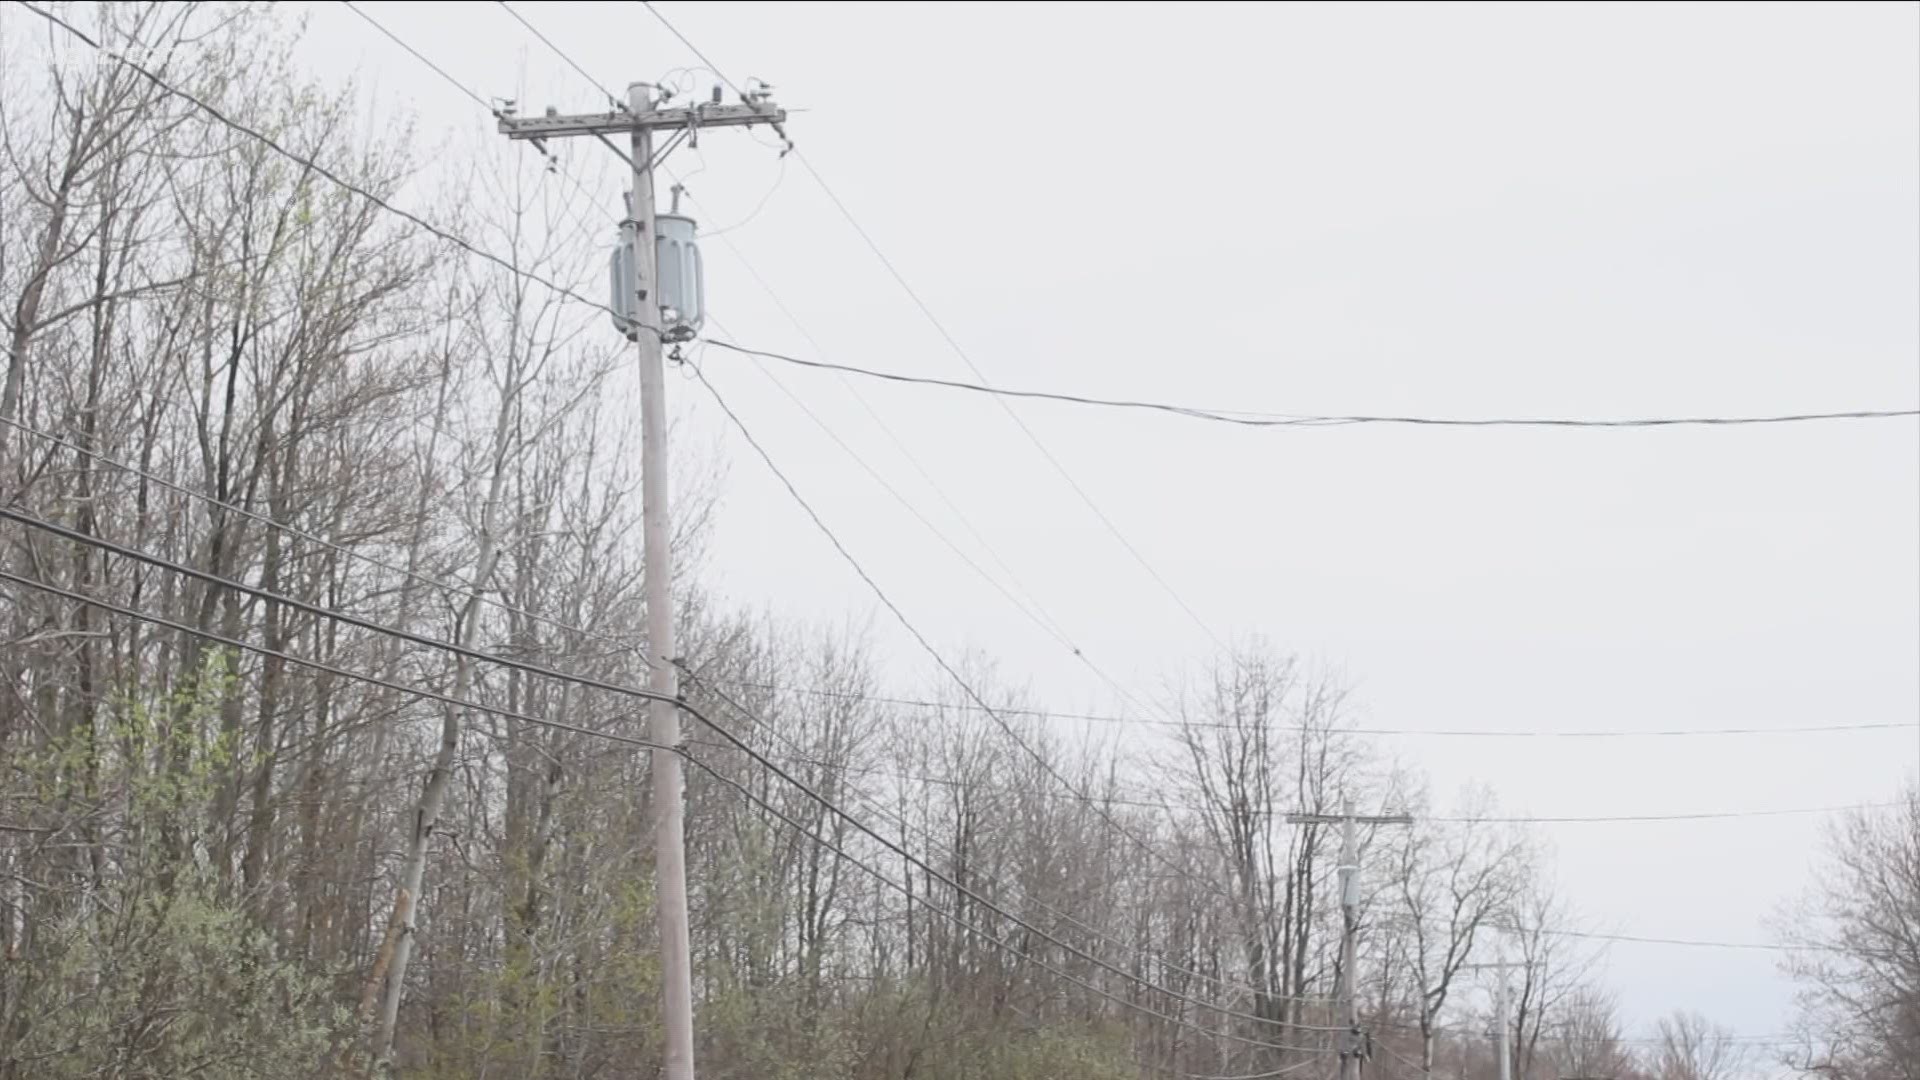 Channel 2 reports on the Cattaraugus territory of the Seneca nation, and how digital red-lining has left the nation disconnected for decades.